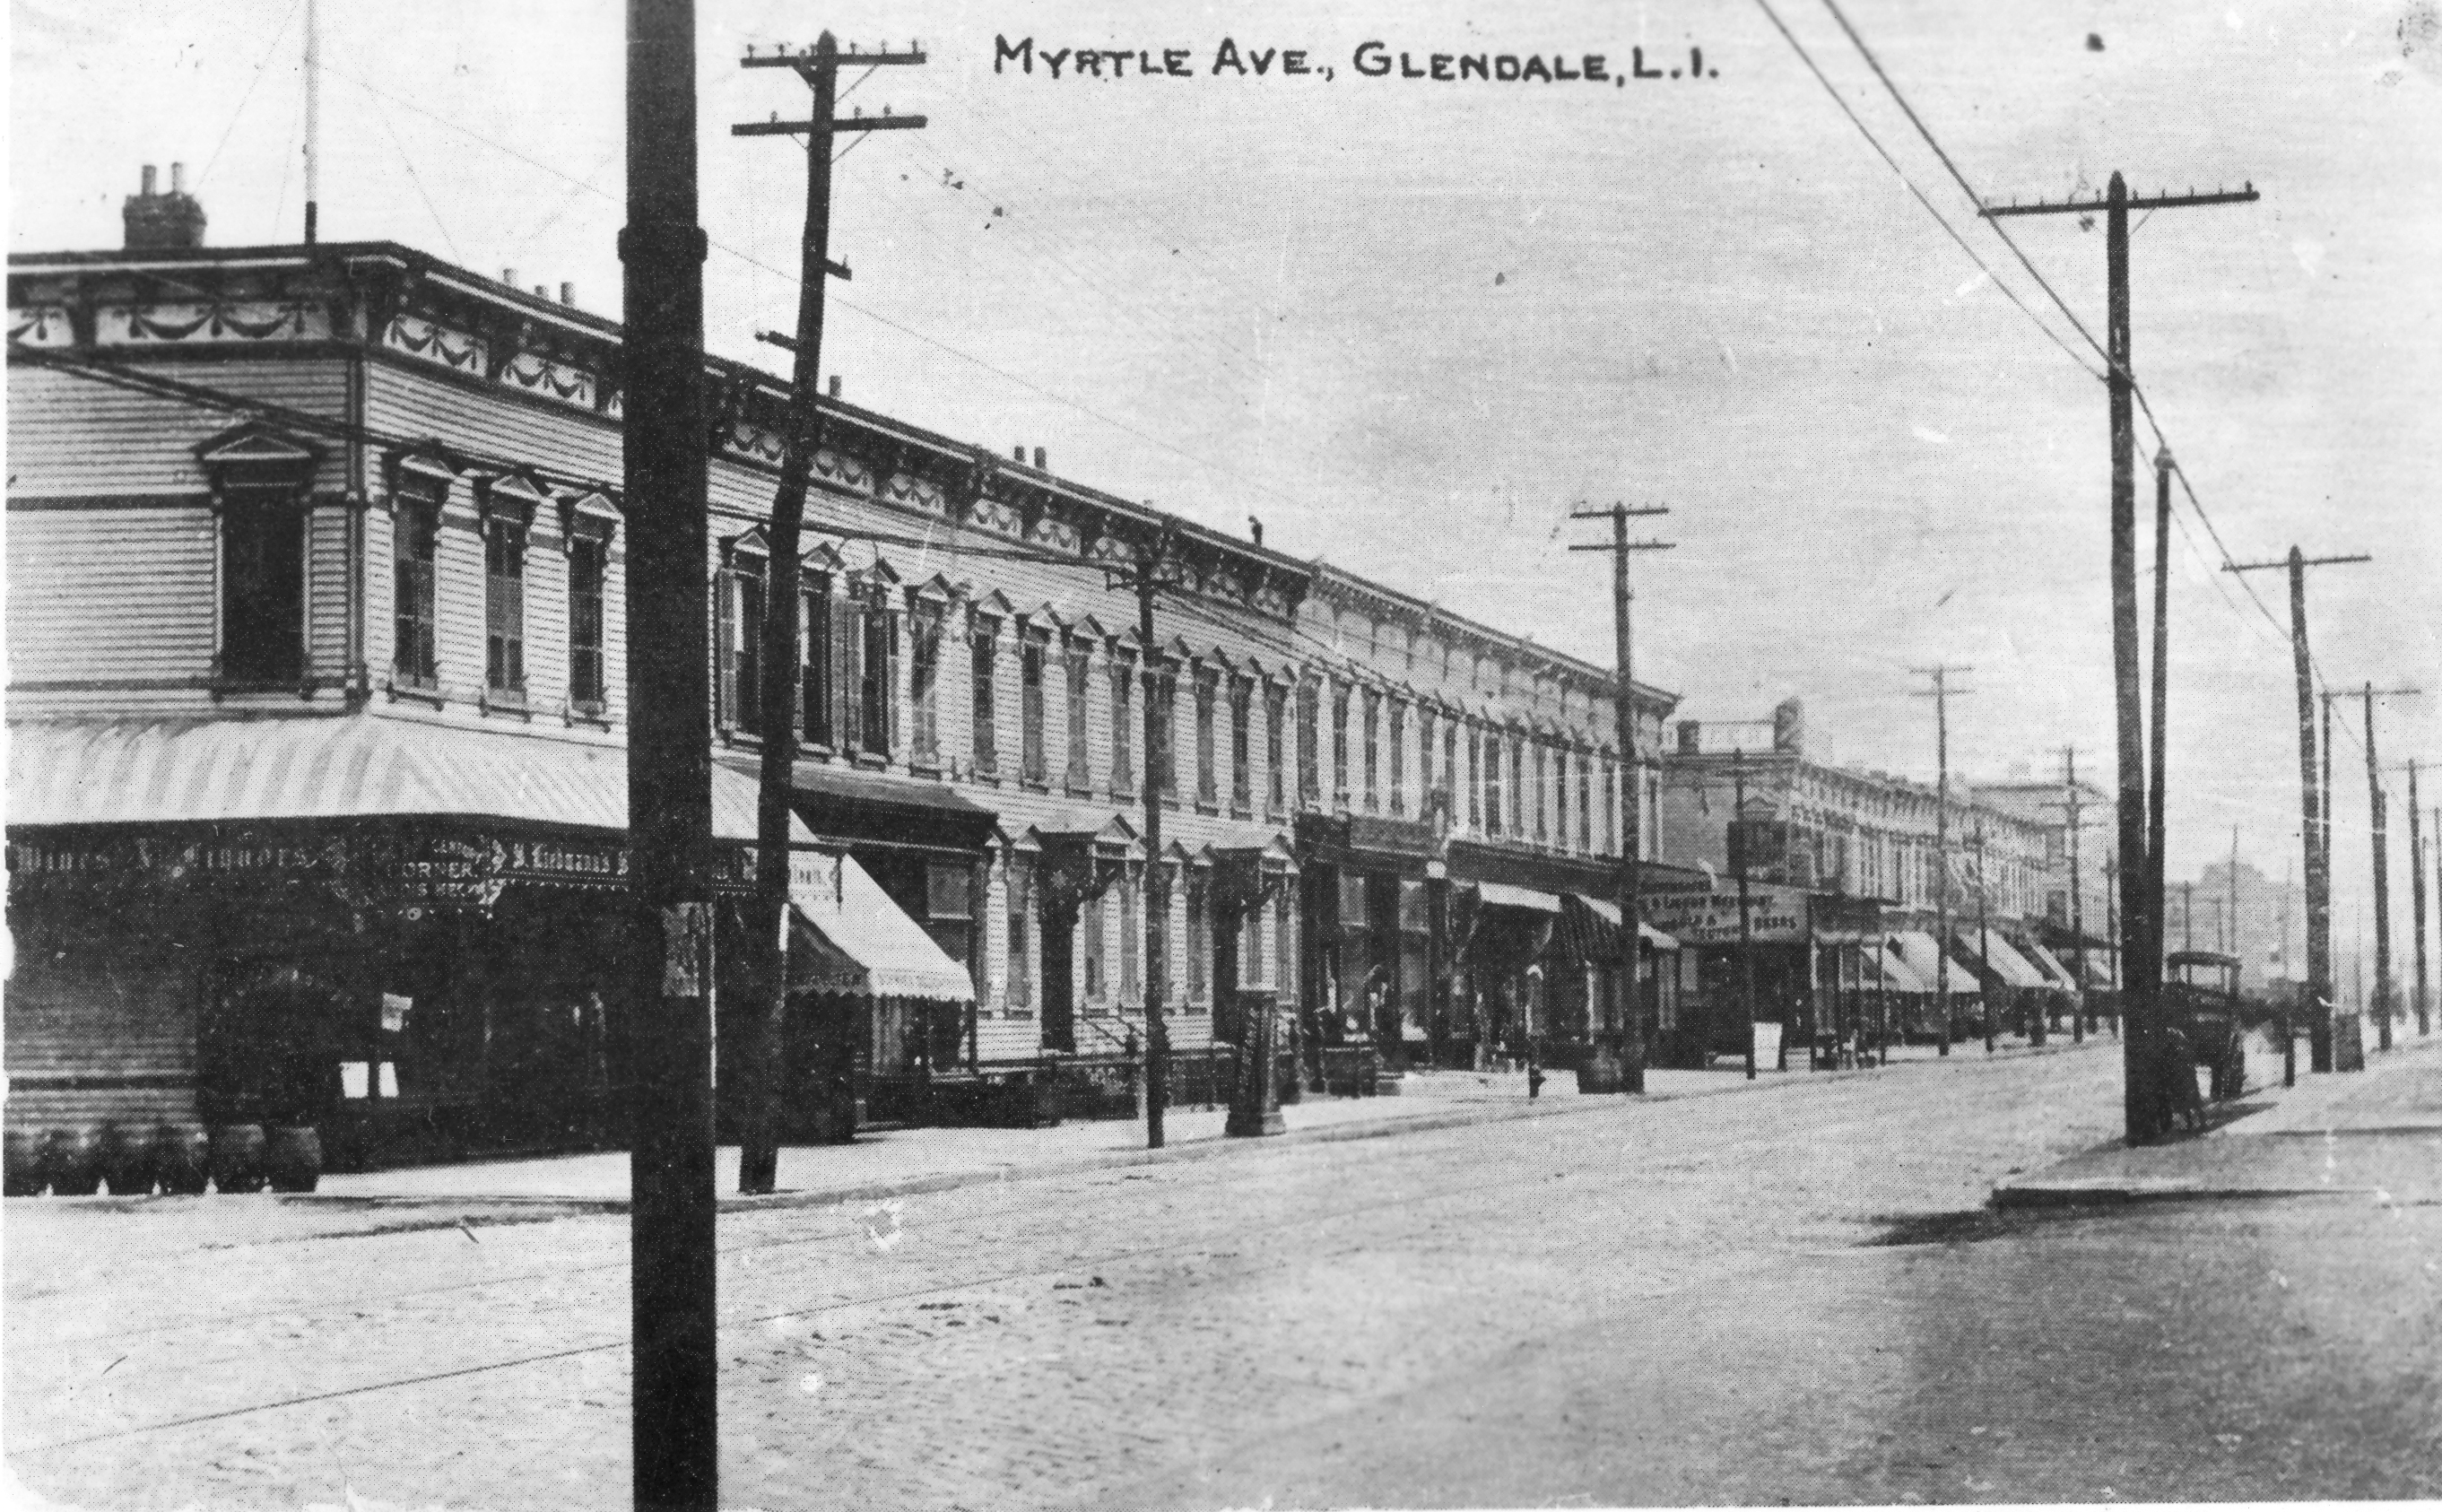 This 1912 postcard shows Myrtle Avenue looking eastward from the corner of present-day 69th Street in Glendale. One block away, on the north side of the street, was where Brockmann’s Hanover House Hotel once stood.